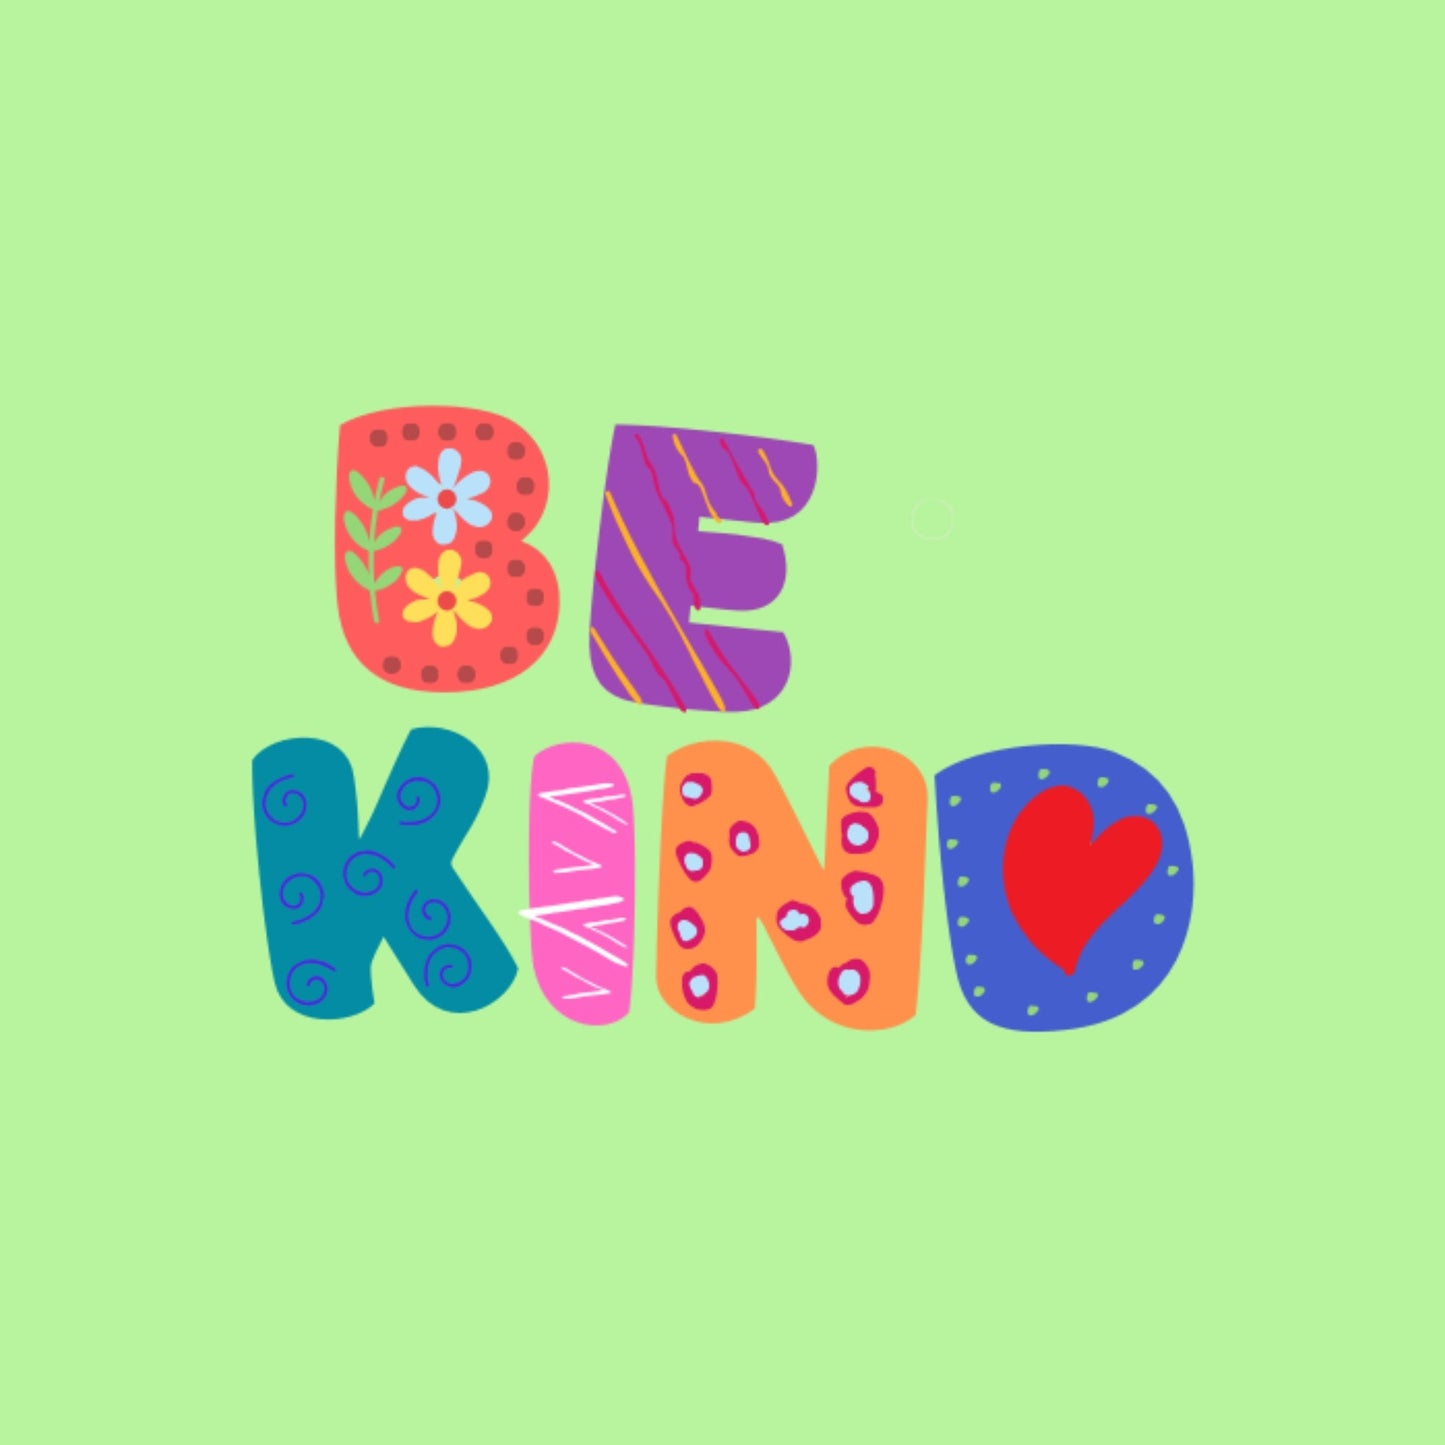 Be Kind Kiss Cut Sticker Retro Hippie Style Vintage Decal Bright Color Sticker